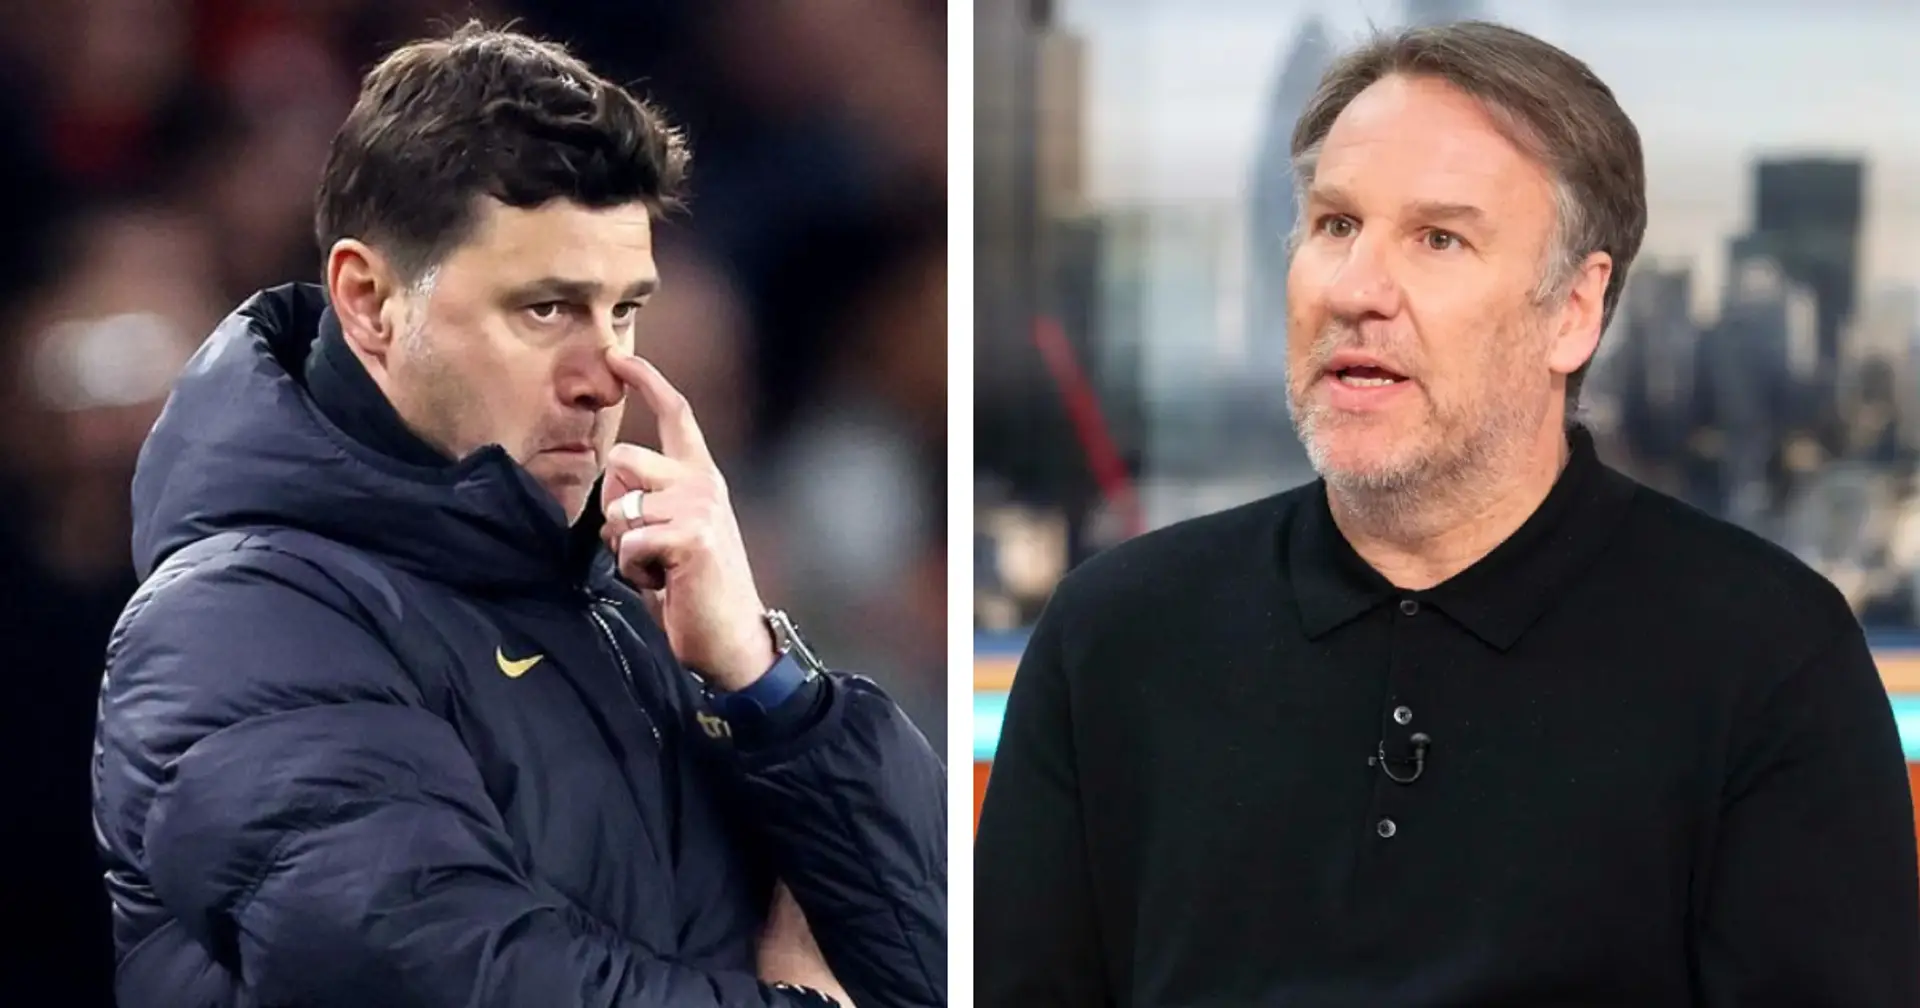 'I don't know what he can do': Paul Merson argues sacking Pochettino won't solve Chelsea problems